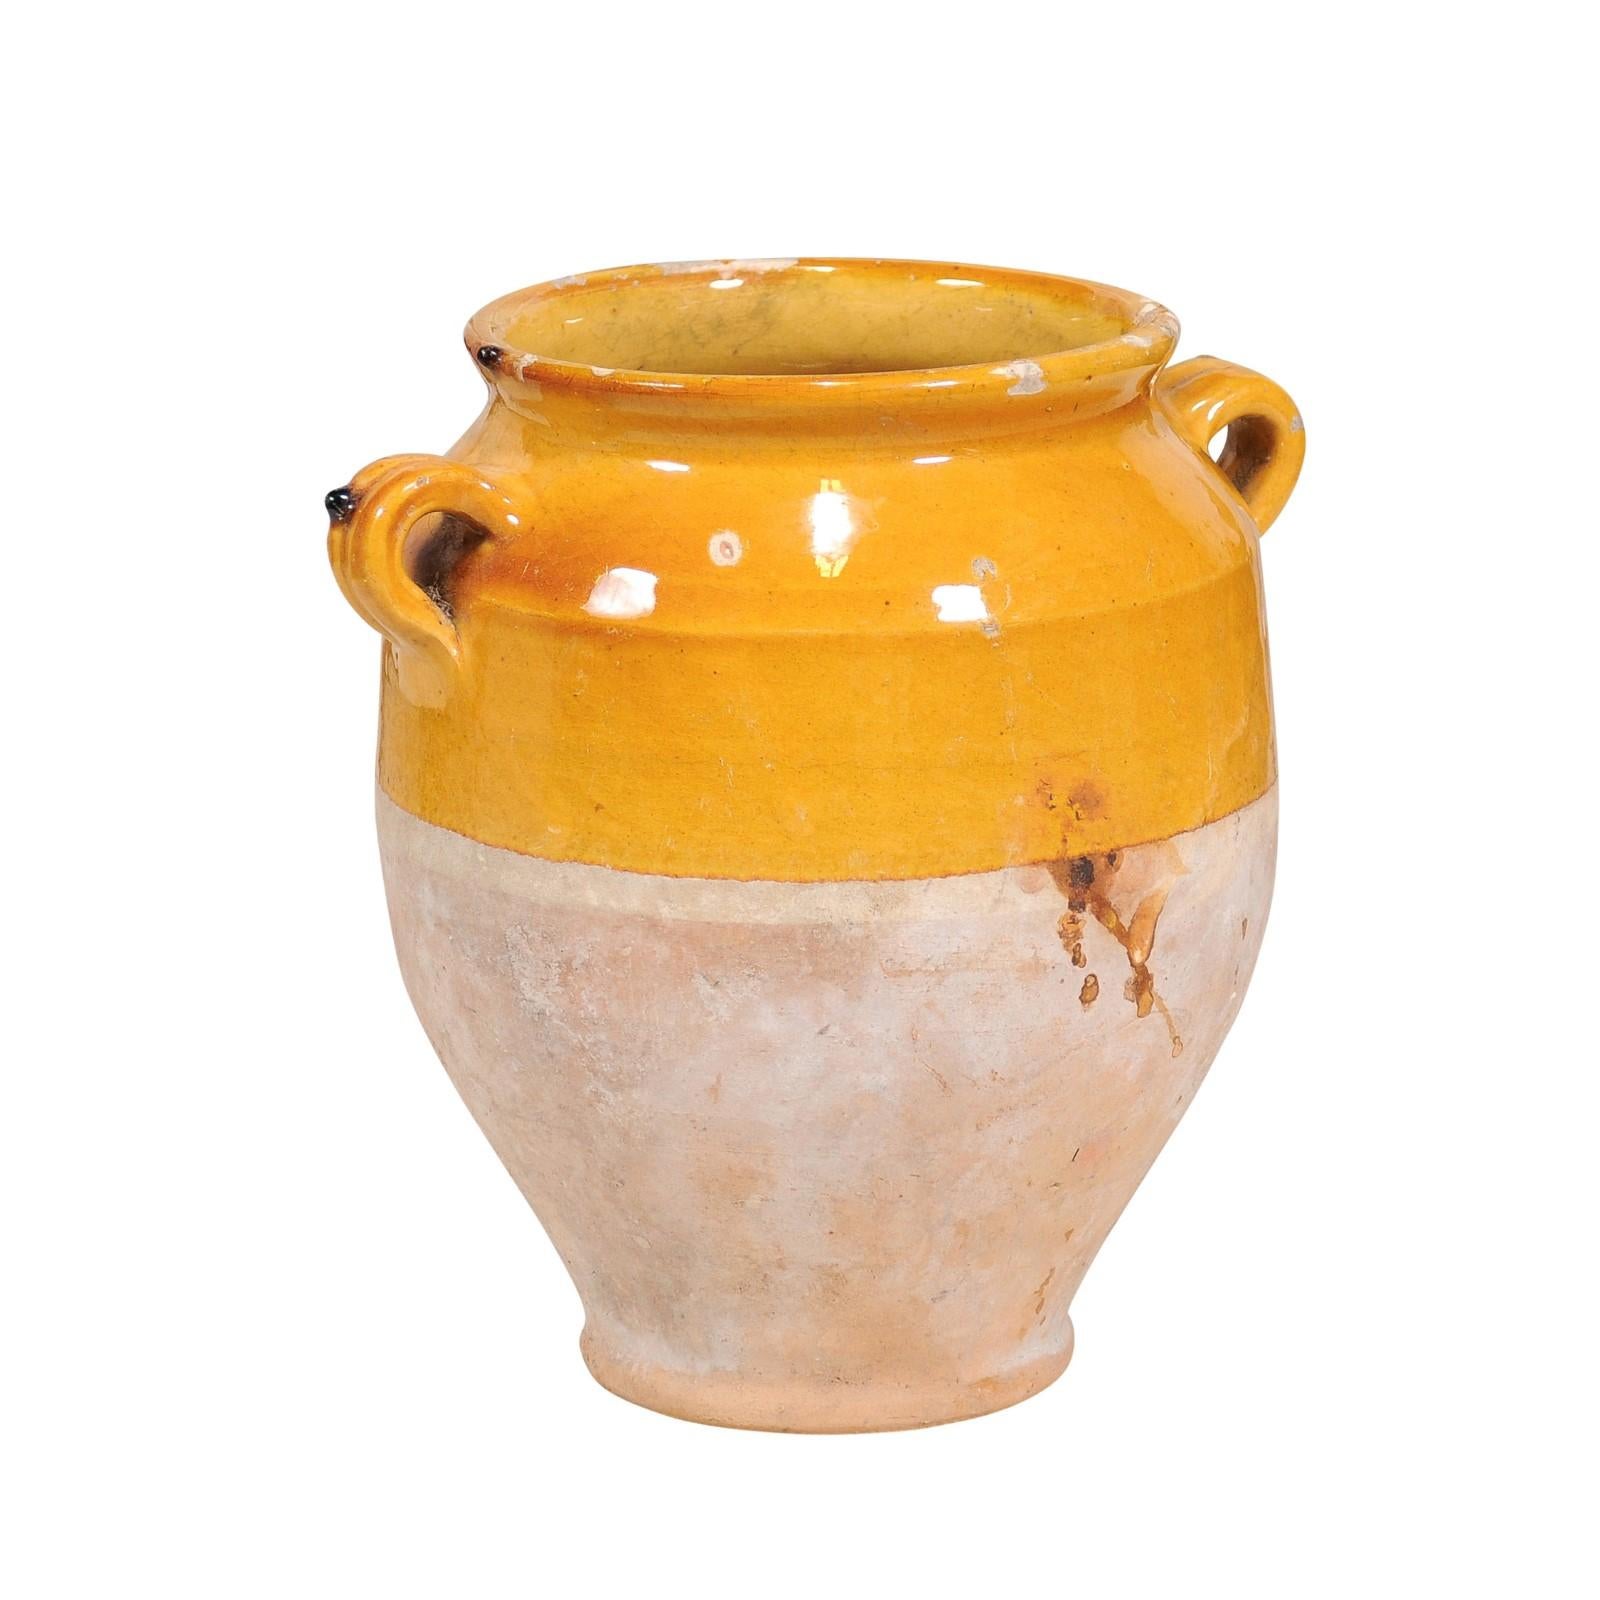 A rustic French Provincial pot à confit from the 19th century with yellow glaze and double handles. Step into the rustic charm of the French countryside with this authentic 19th-century French Provincial pot à confit, a piece that encapsulates the